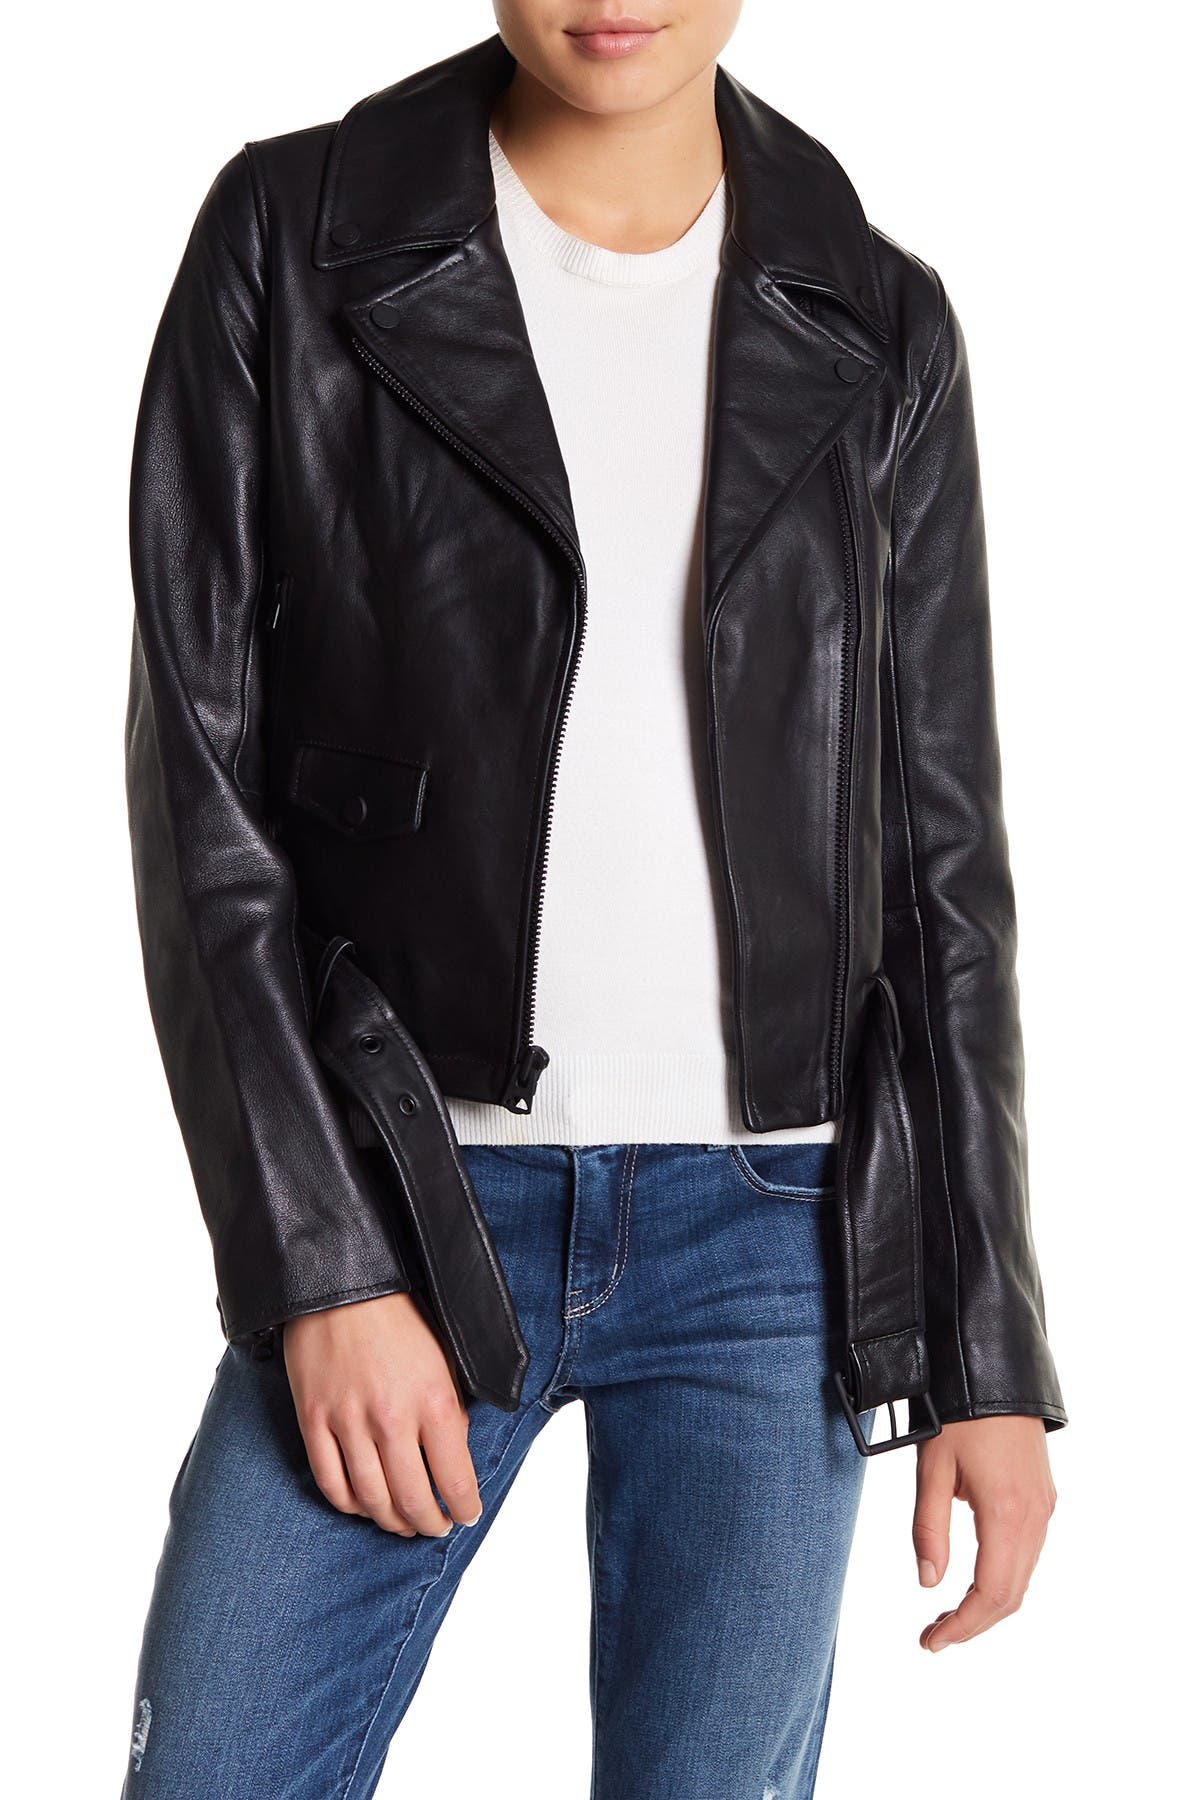 seven for all mankind leather jacket